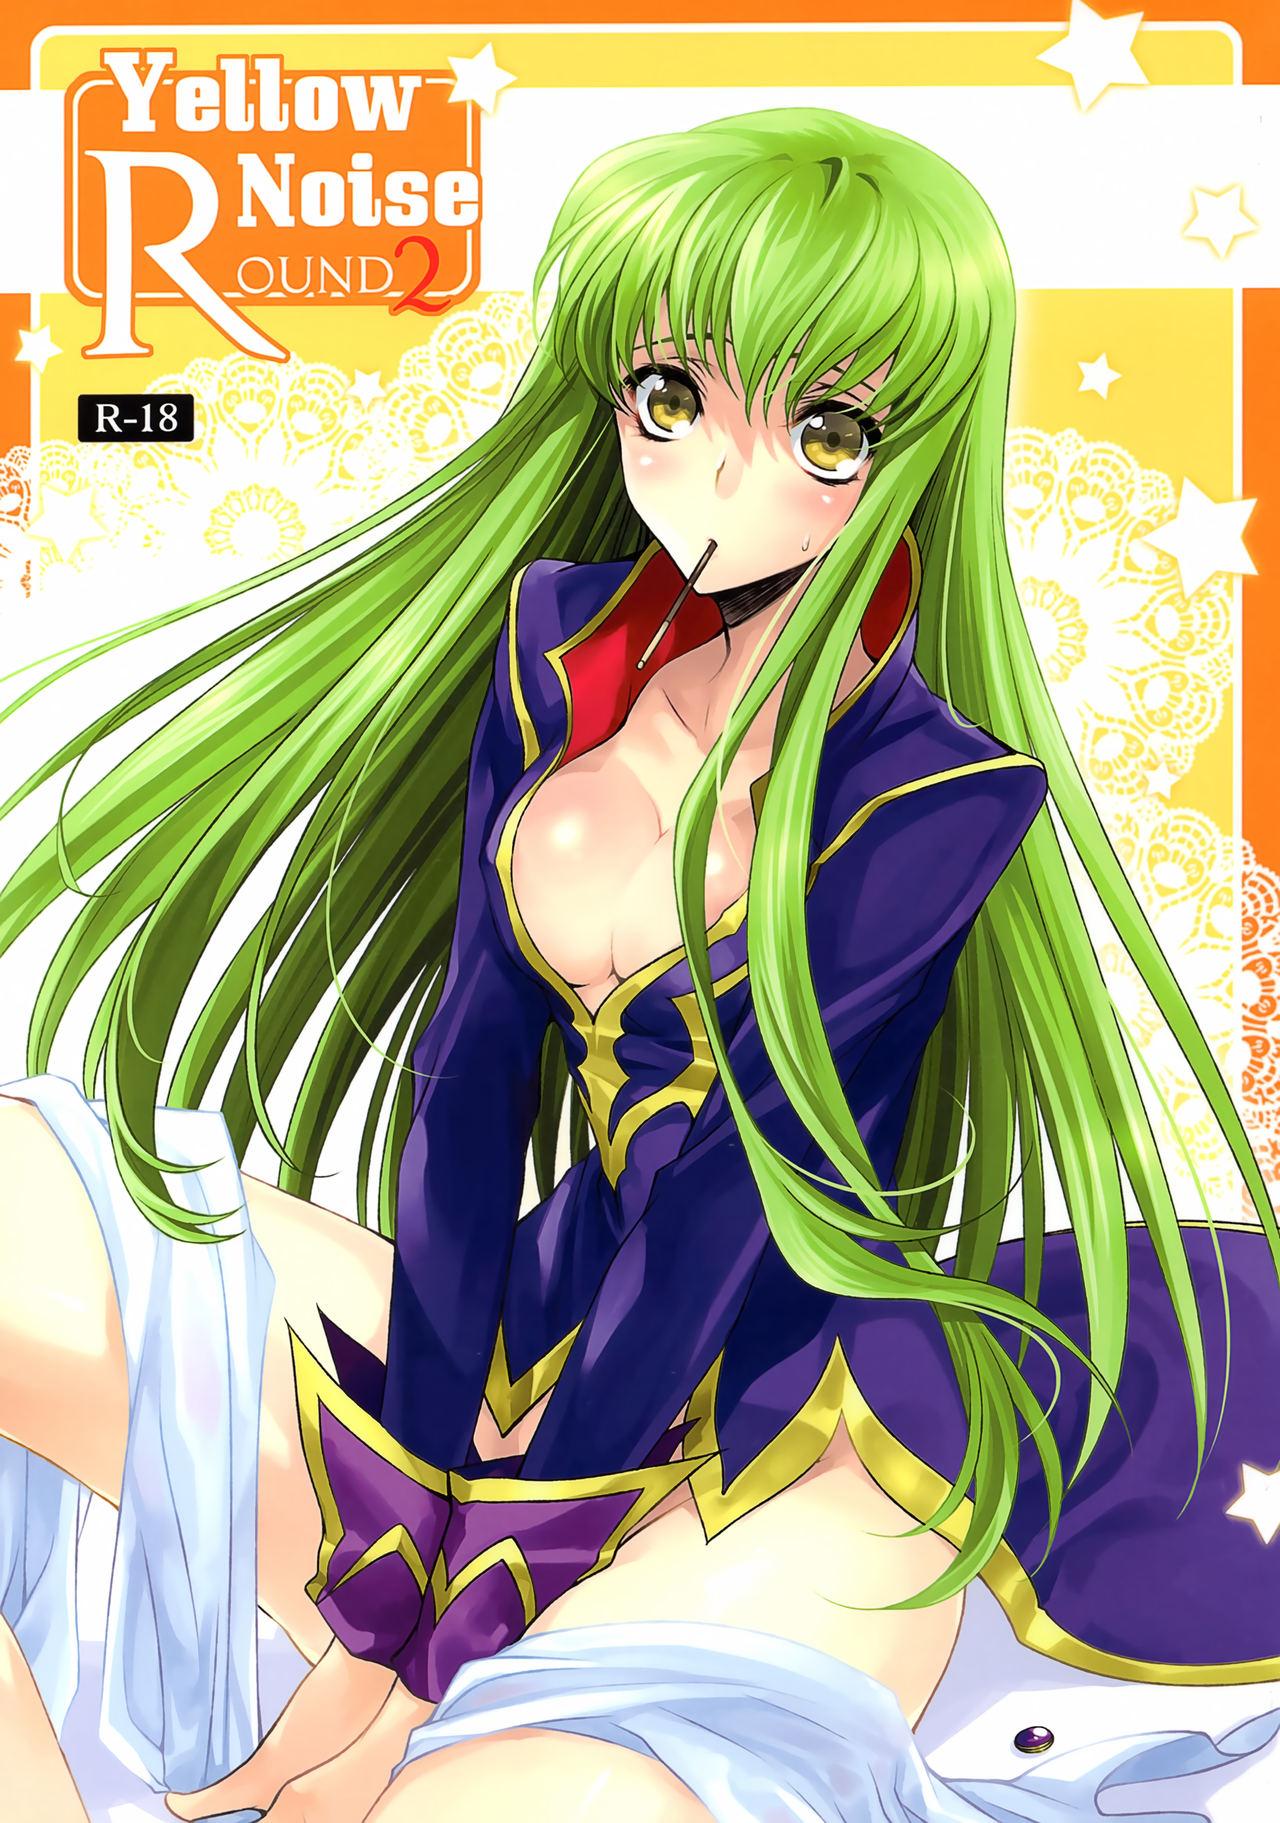 Stepdaughter YELLOW NOISE Round 2 - Code geass Tiny - Page 1